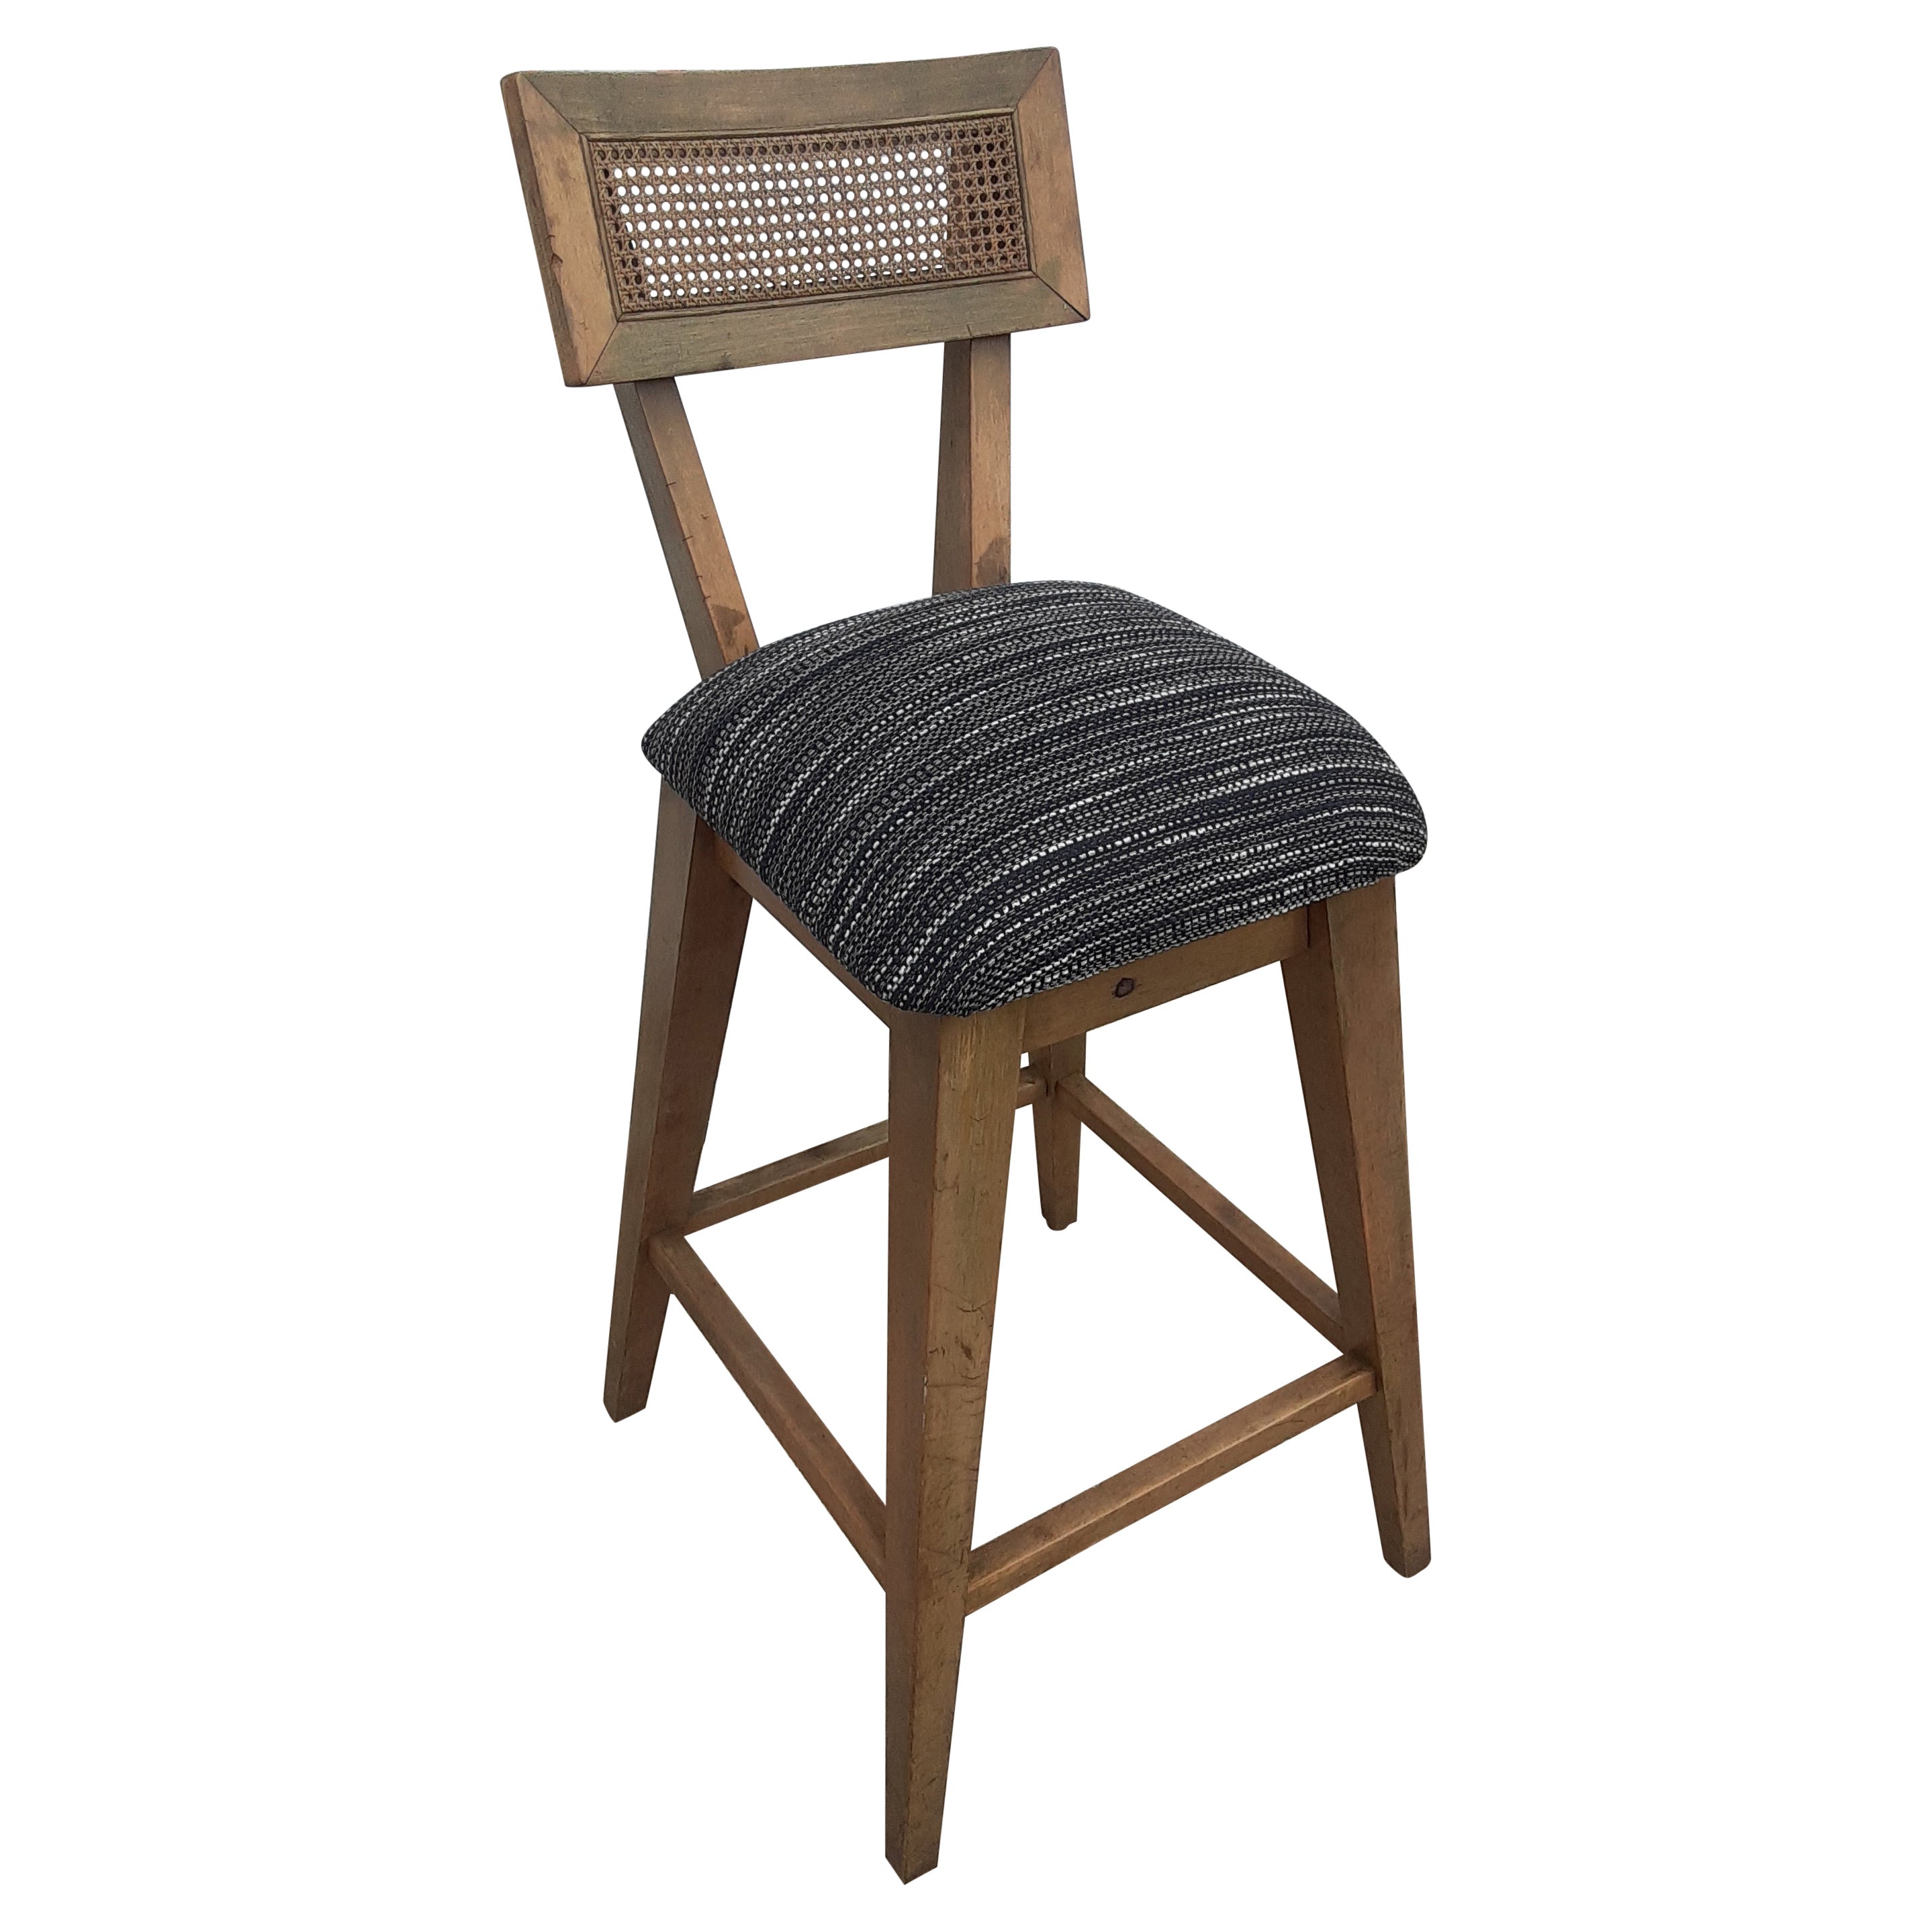 Mid-Century Modern Cane Back Barstool with Upholstered Seat